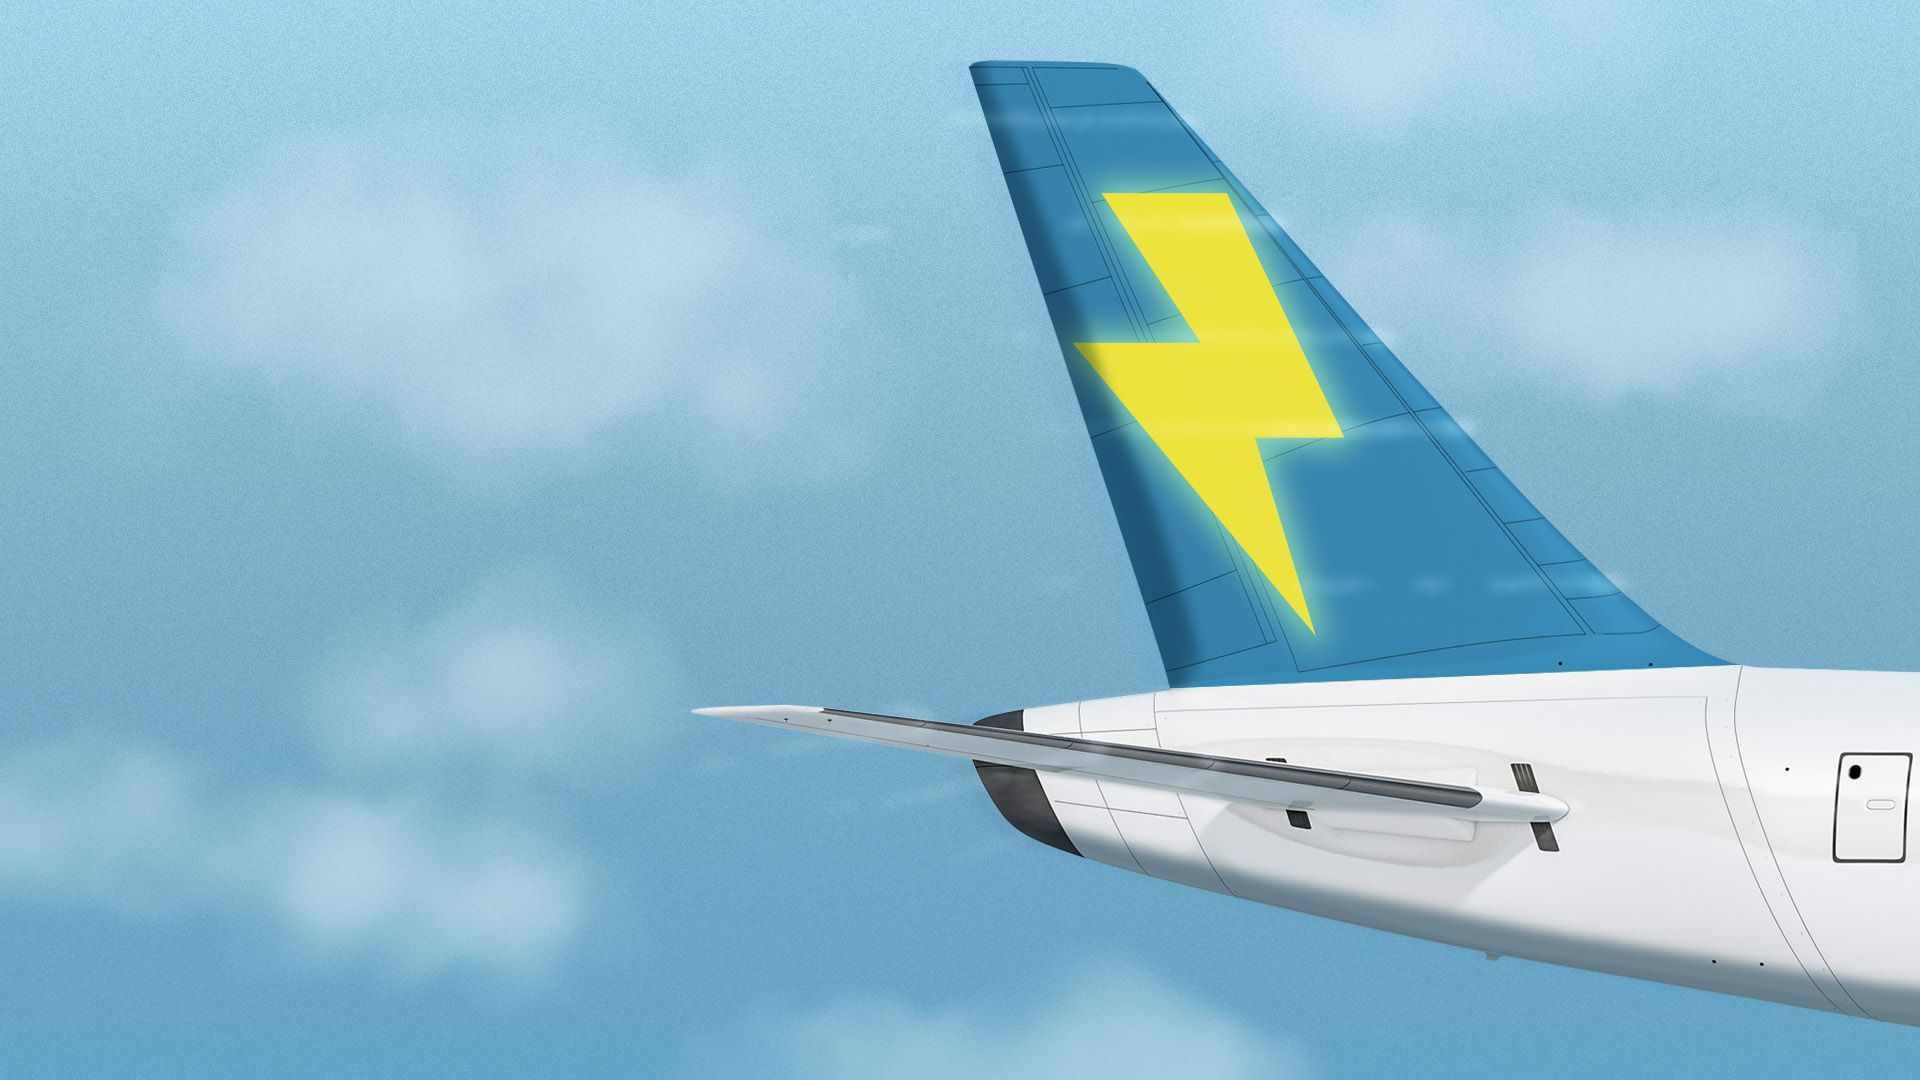 Illustration of an airplane with a glowing lightning bolt on the tail